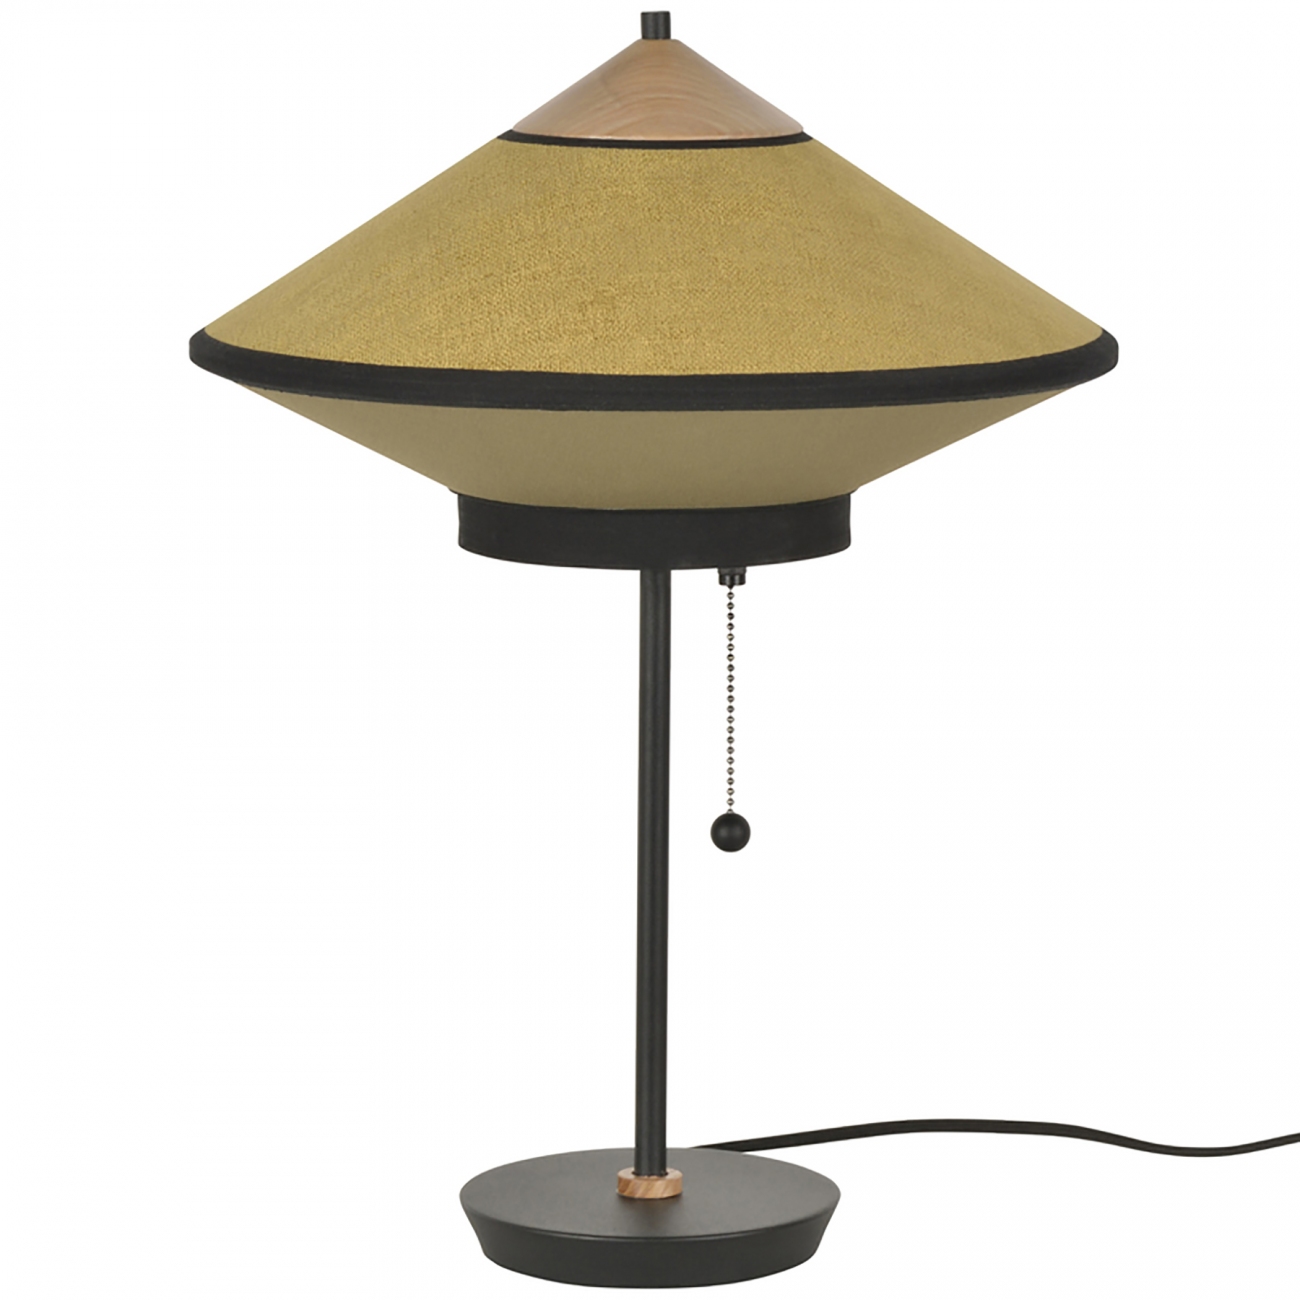 Forestier Paris Cymbal table lamp